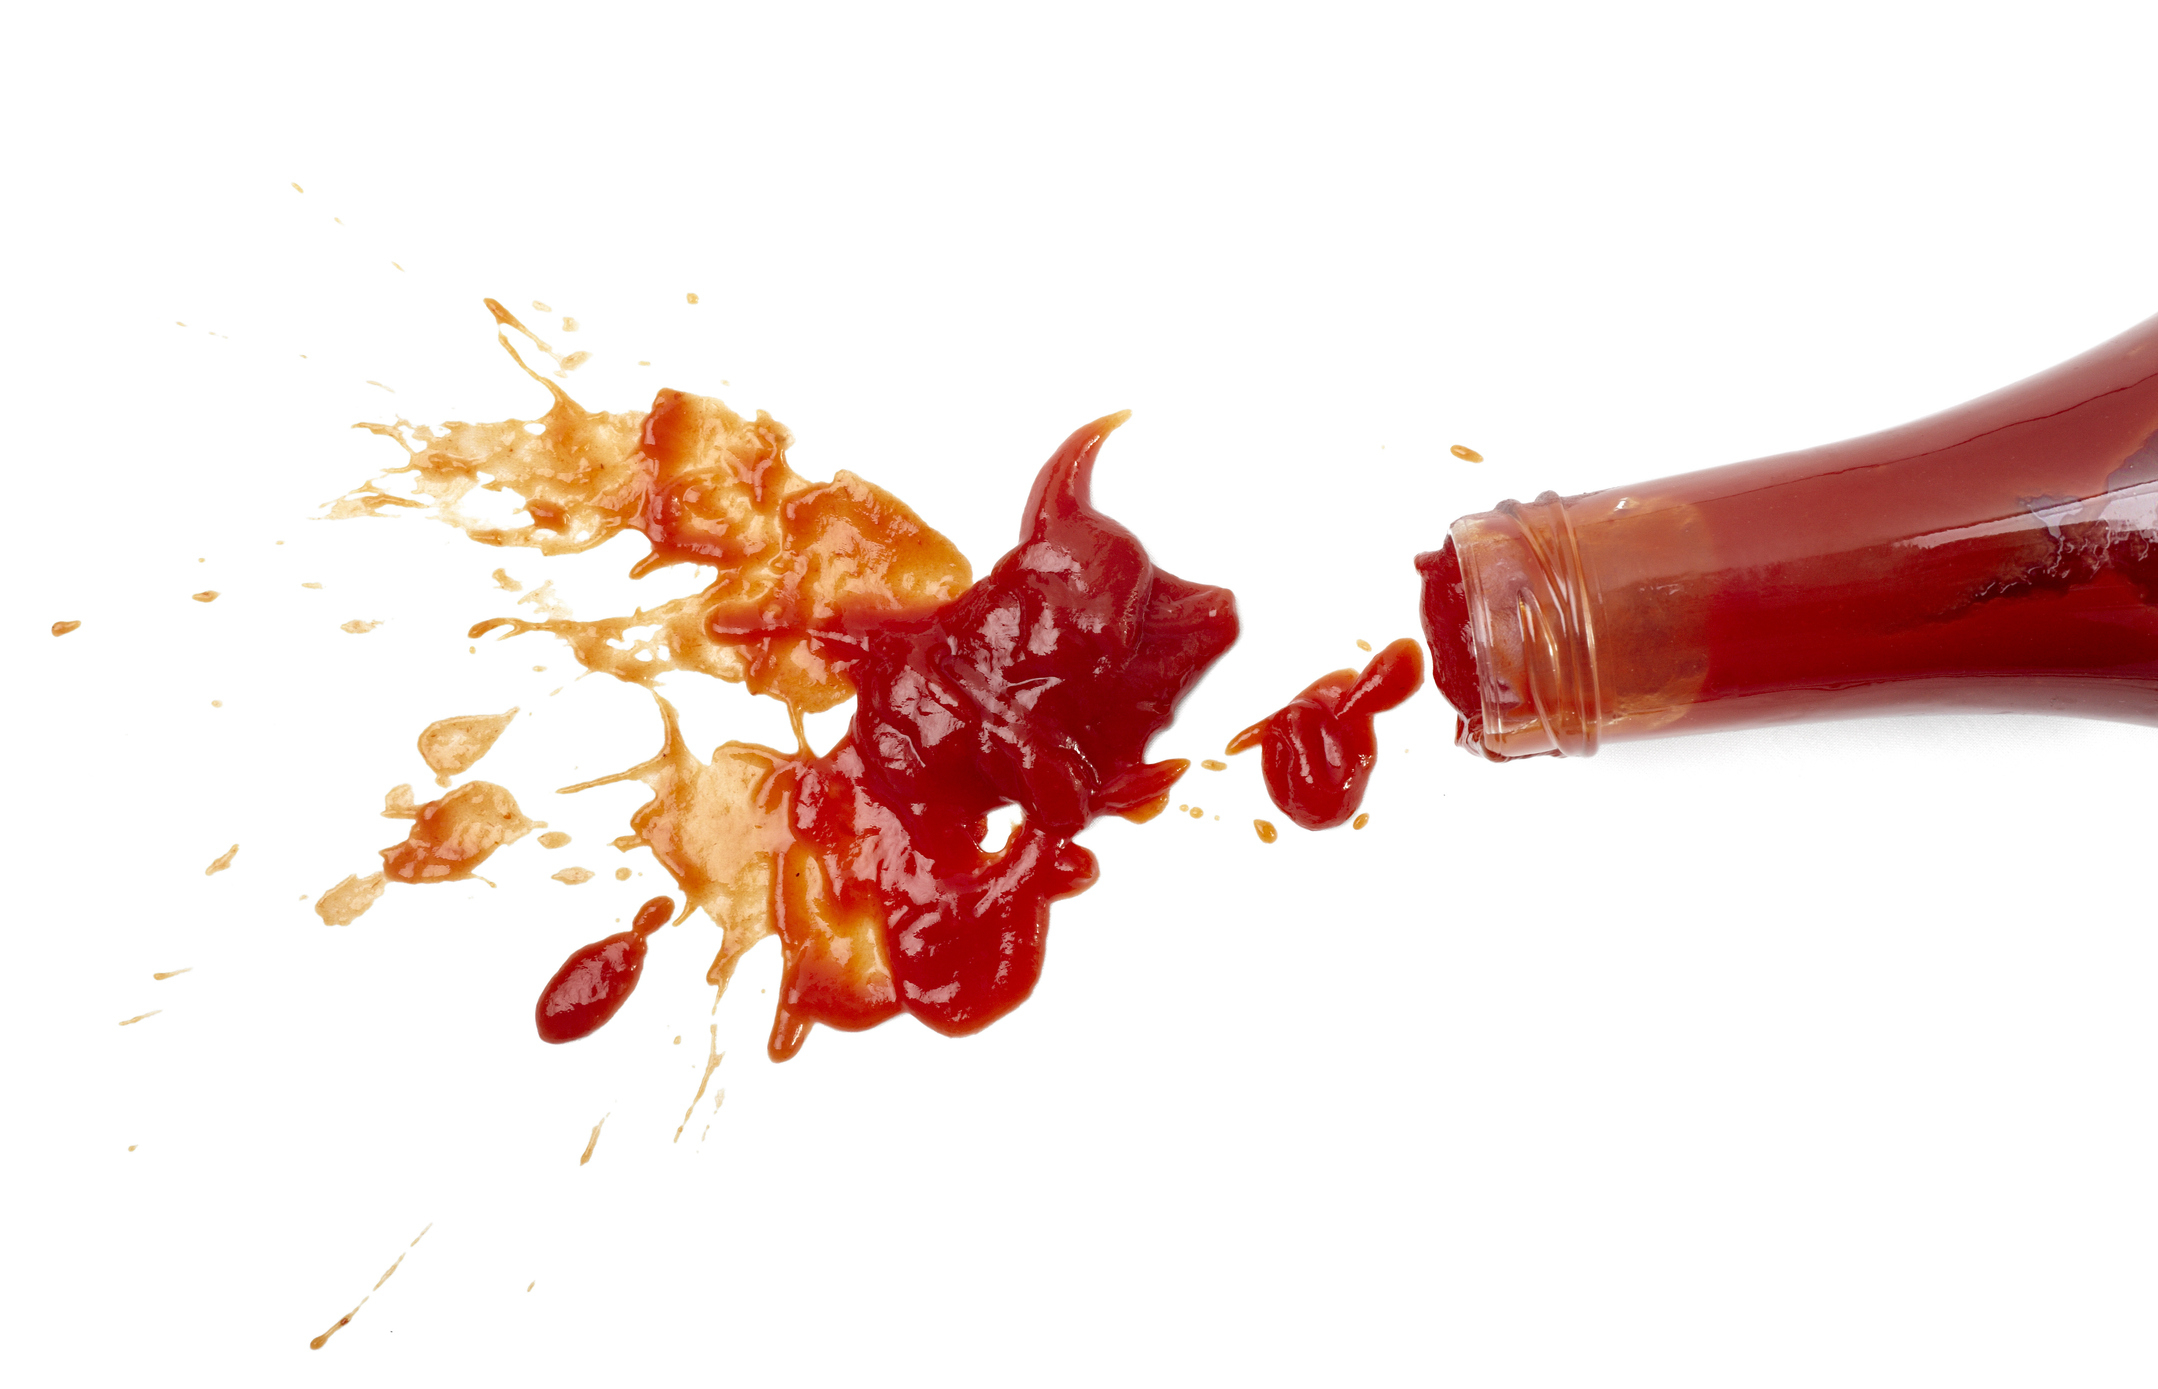 Overturned ketchup bottle with sauce spilling out onto a white surface